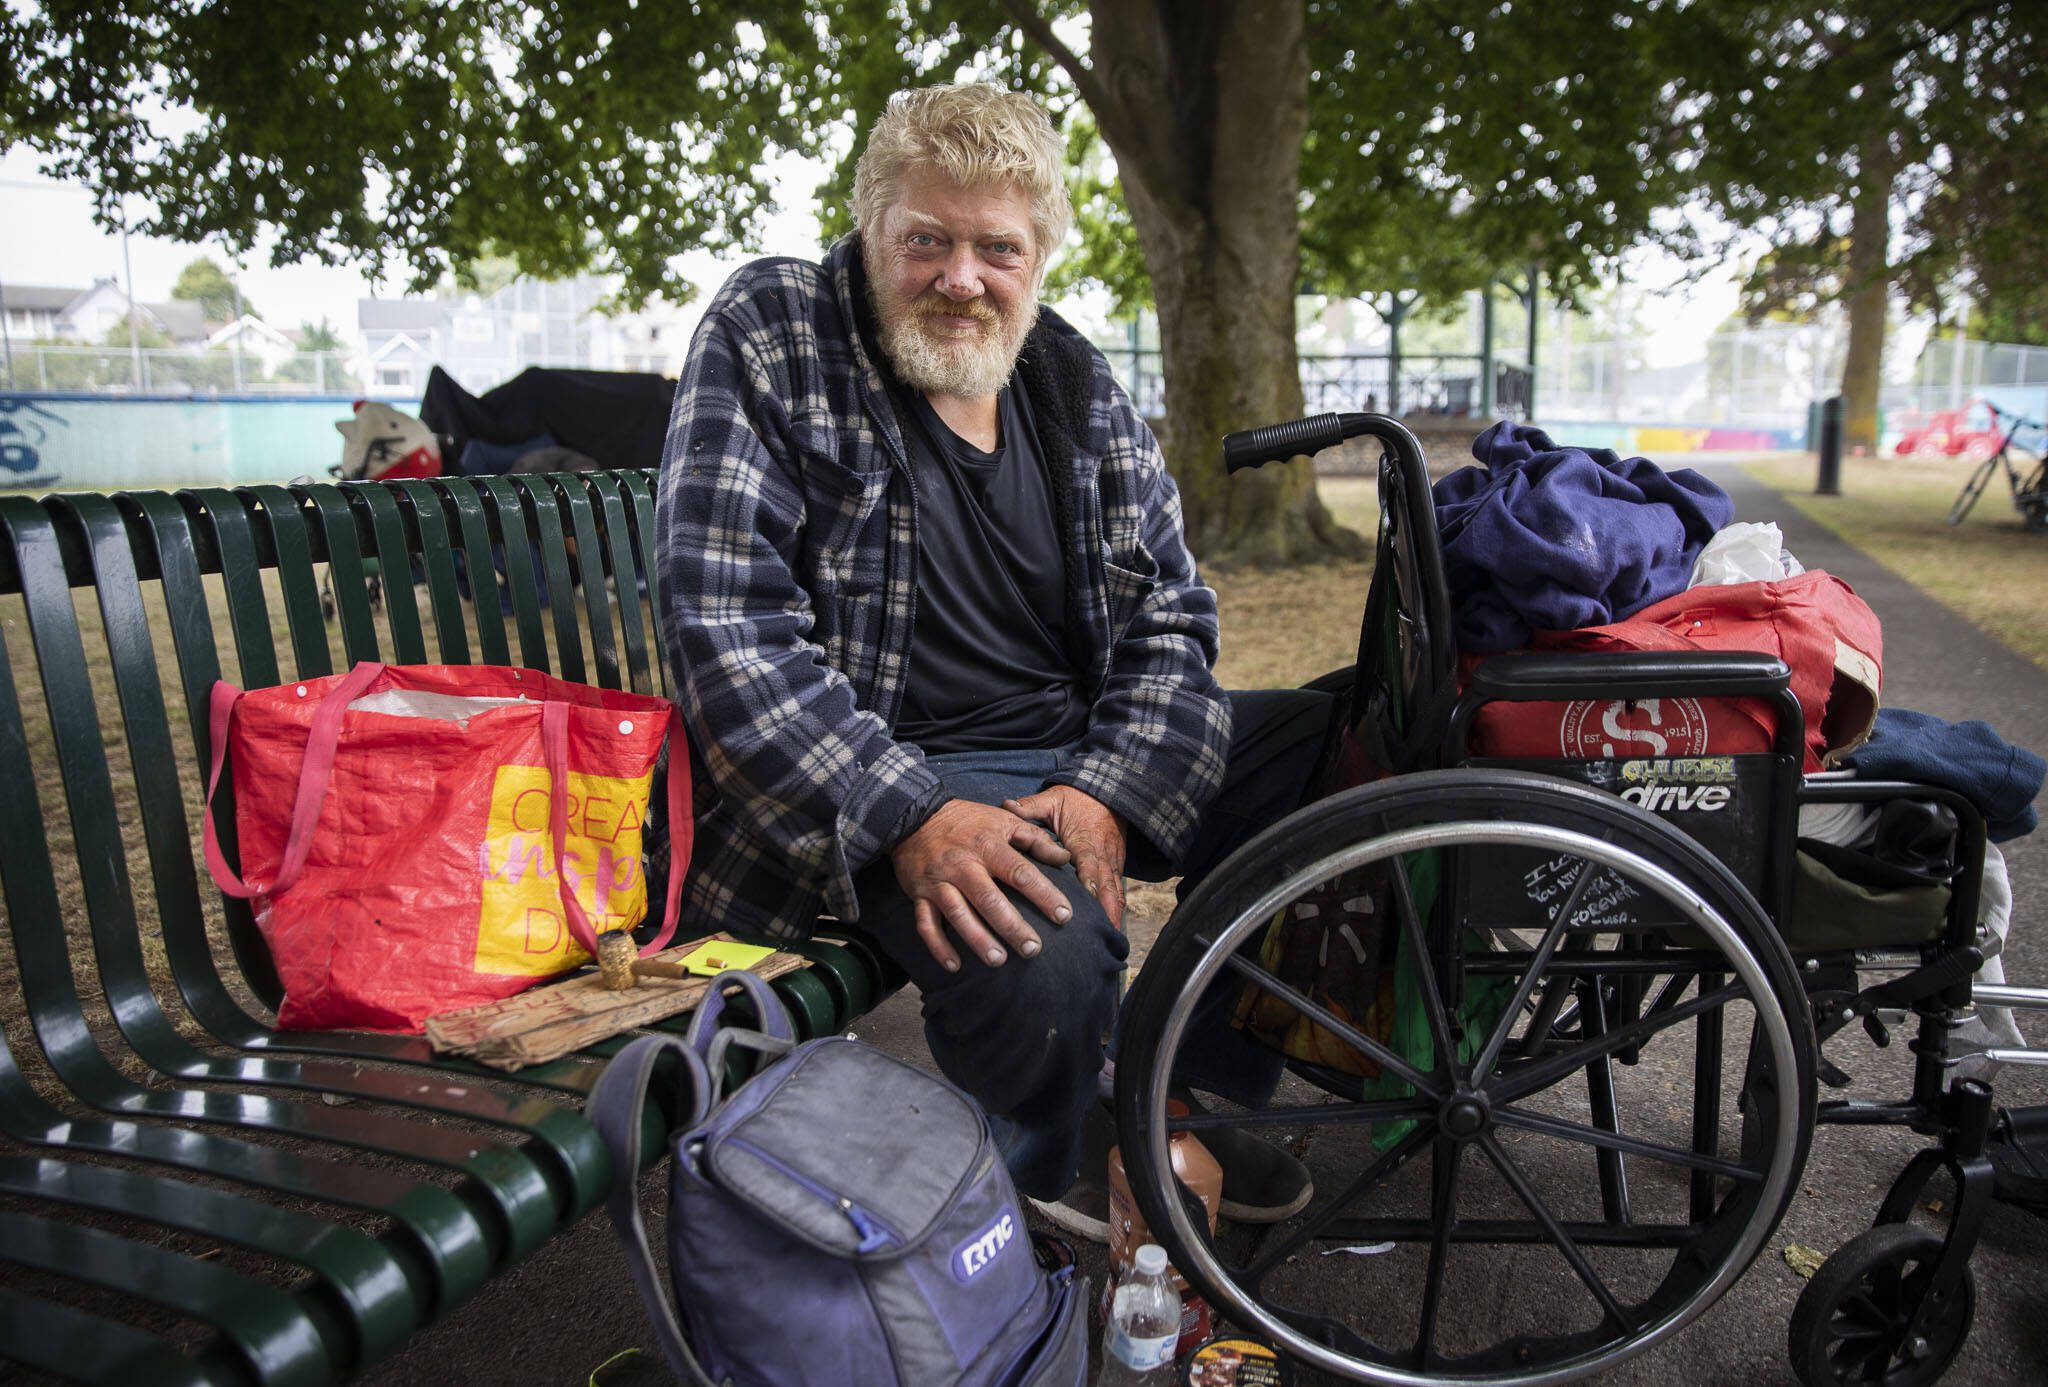 Erik Stewart rests at Clark Park on Tuesday, Aug. 8, 2023 in Everett, Washington. Stewart has been living on the streets for 7 months and dealing with congestive heart failure. (Olivia Vanni / The Herald)